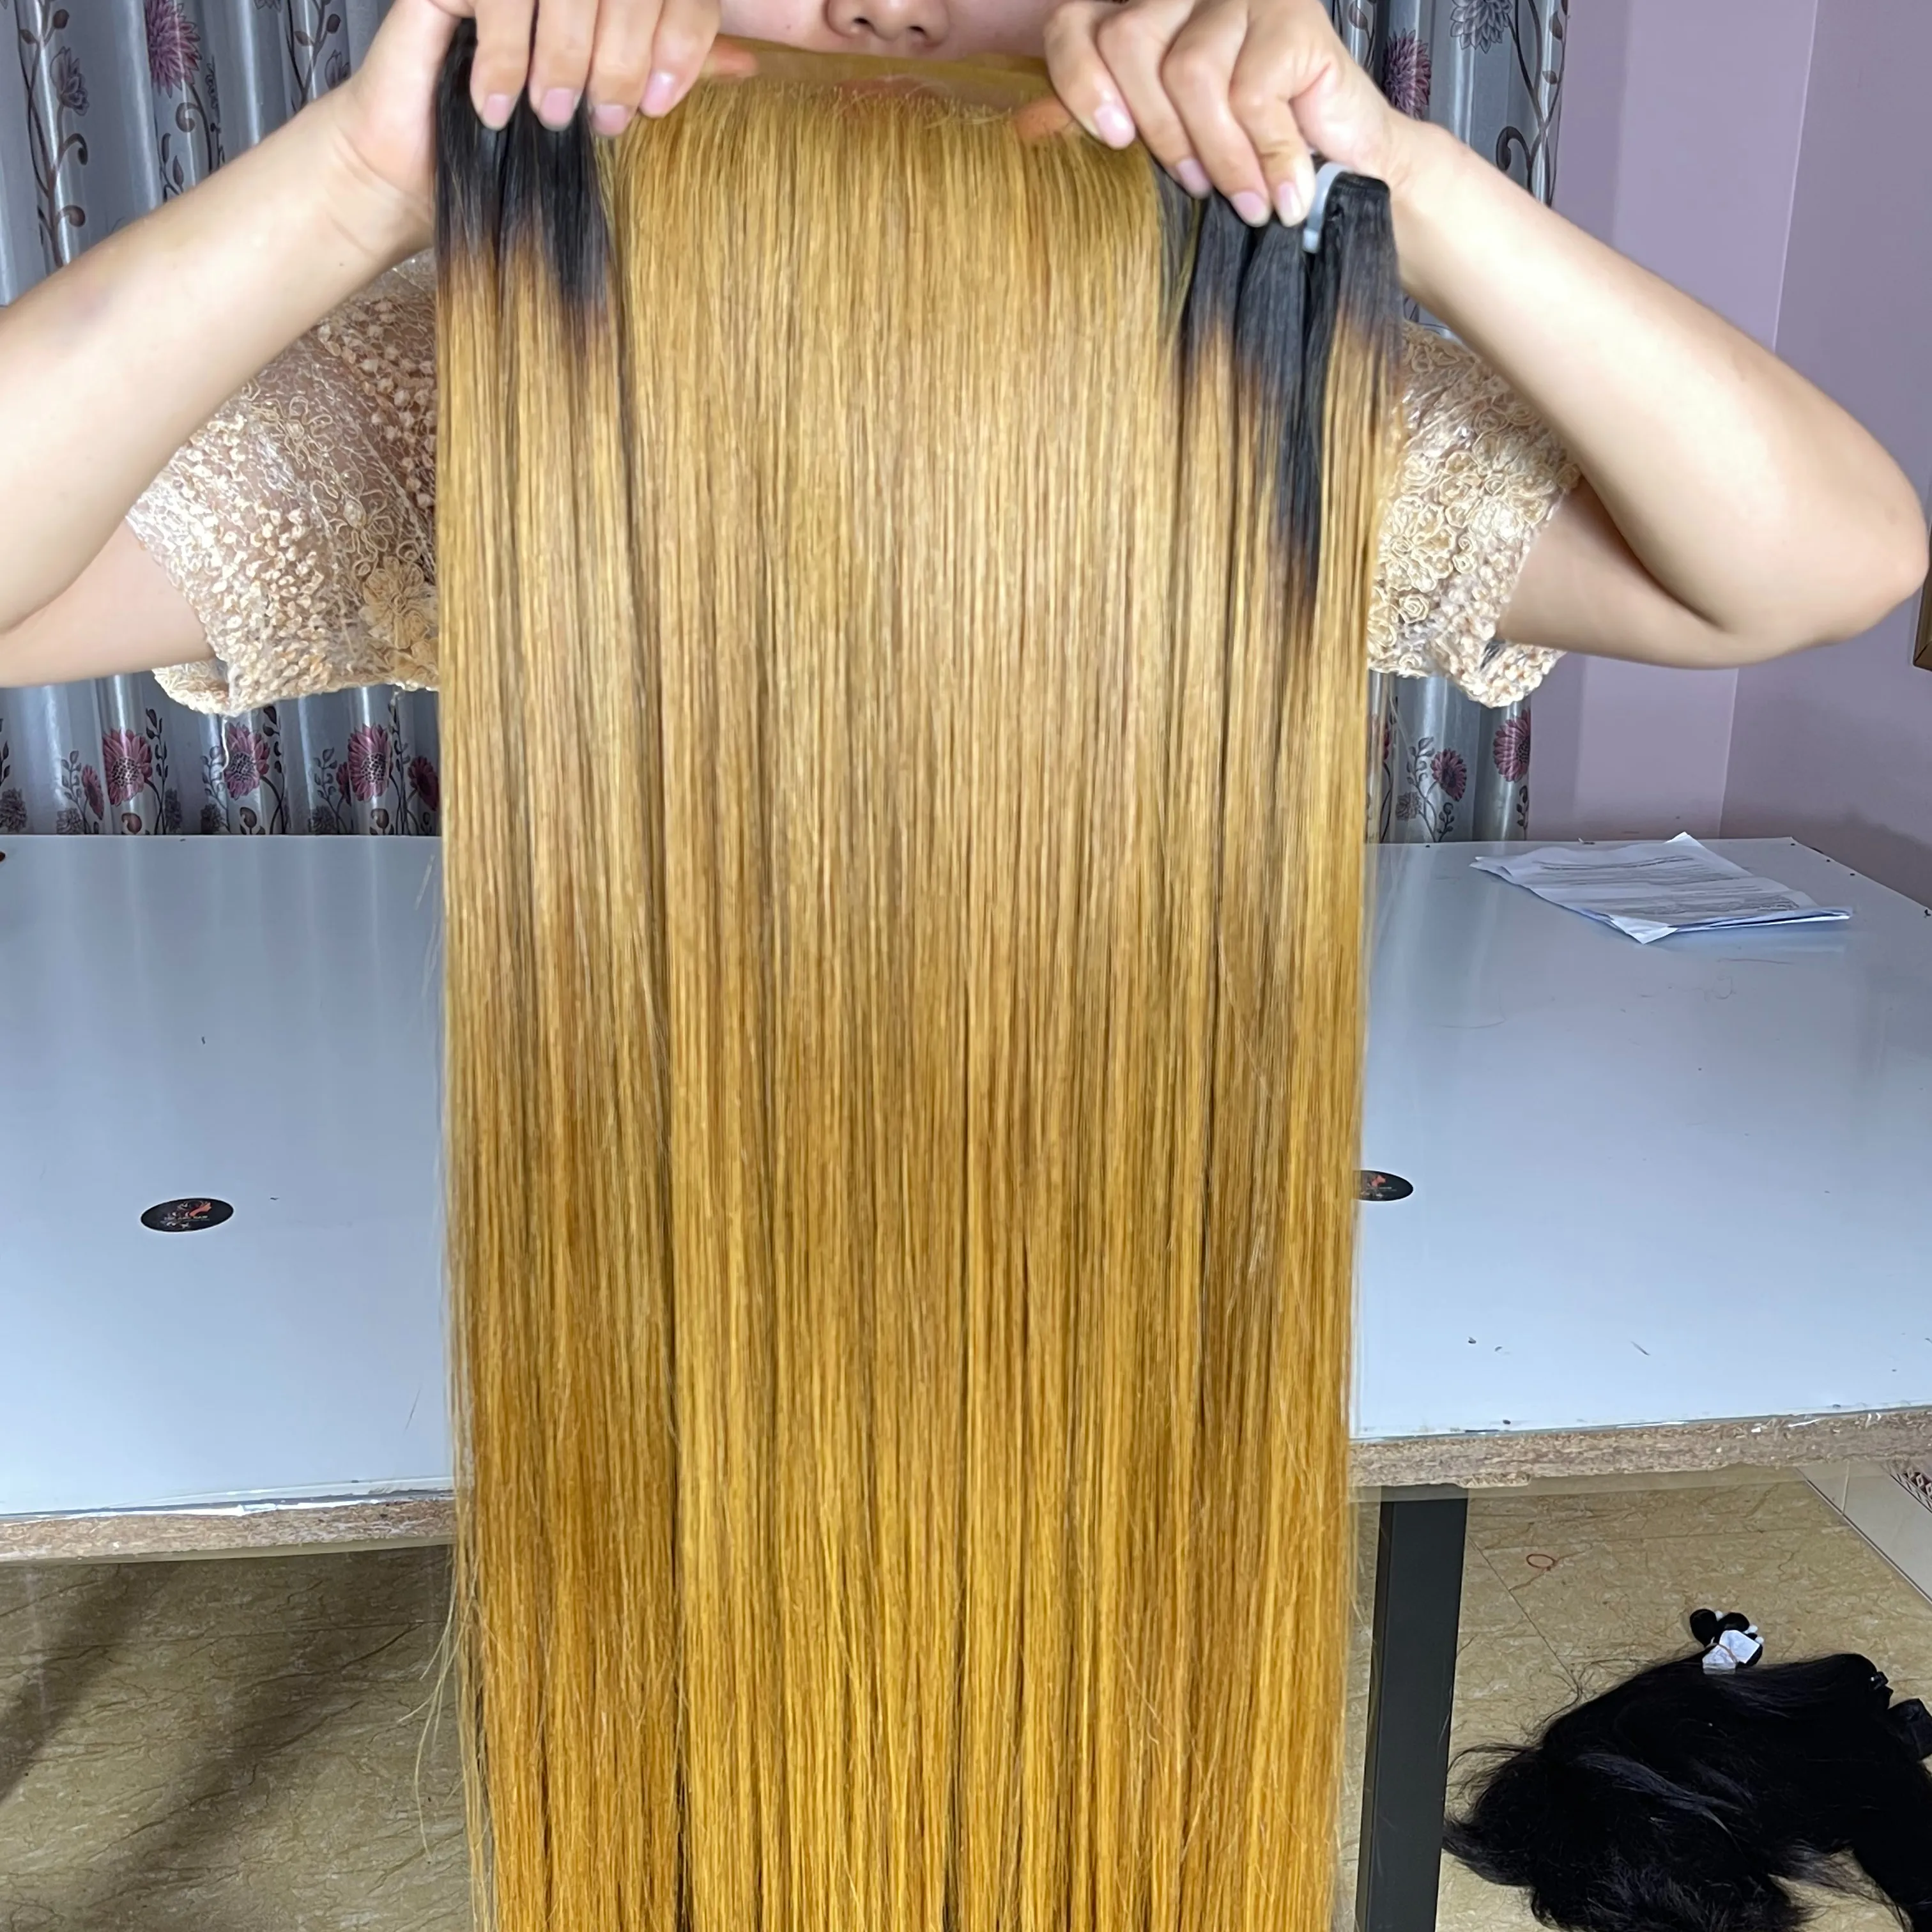 Großhandel 100% Virgin Russian Hair Extensions Braune Farbe Double Drawn Micro Bead Flat U I K rohes Haar rohes indisches Haar